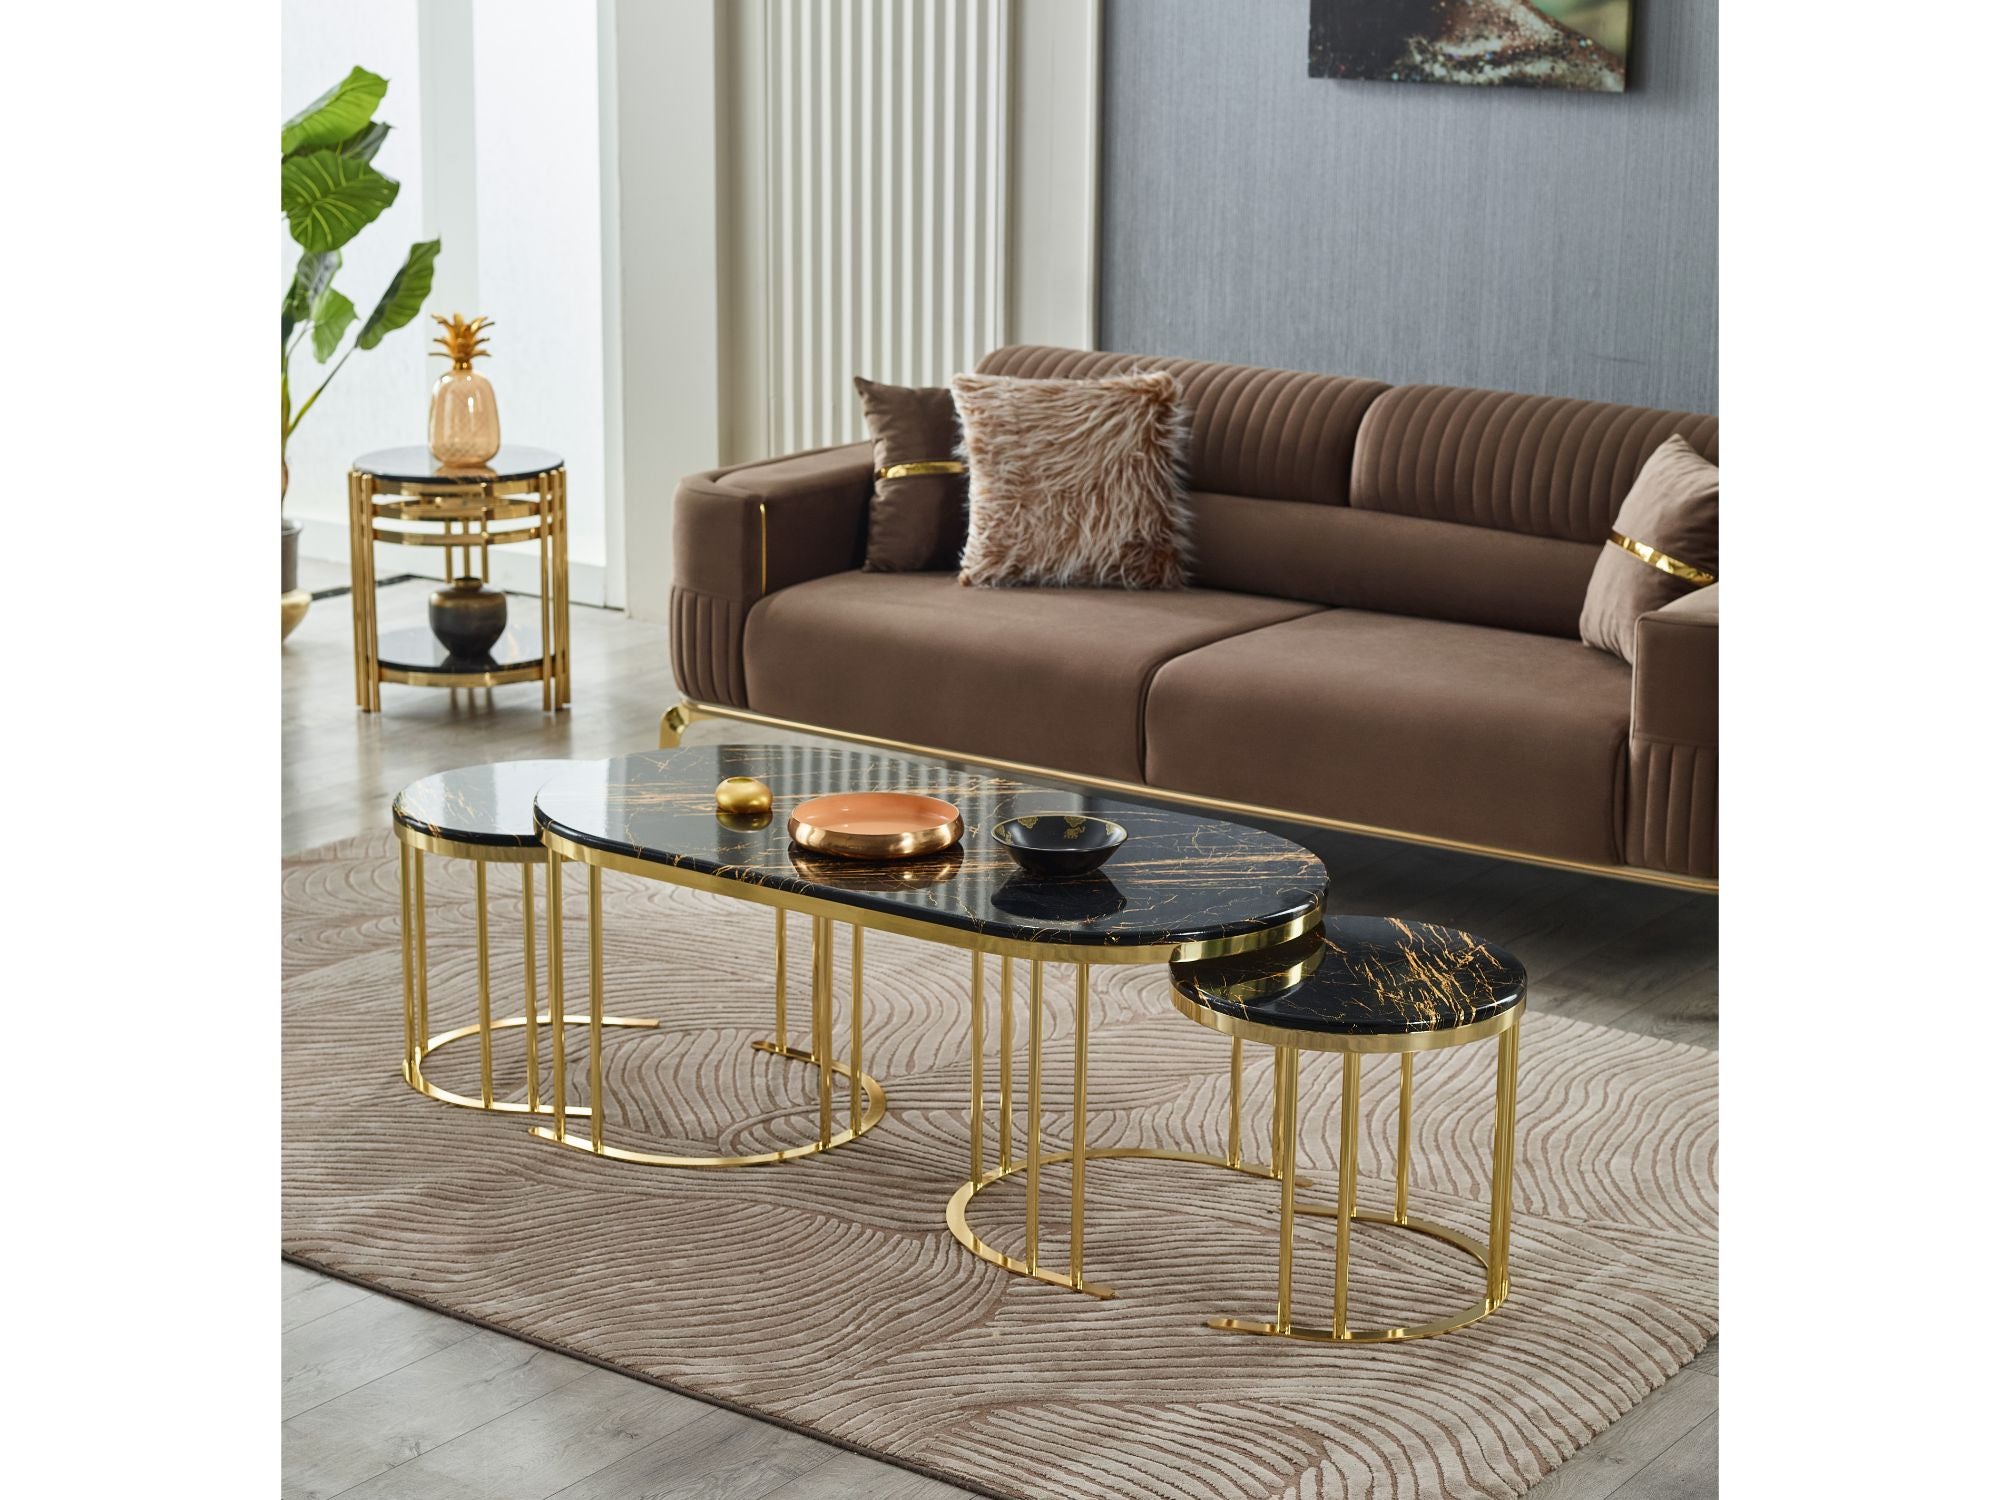 2 In 1 Coffee Table Gold Legs - Black Top